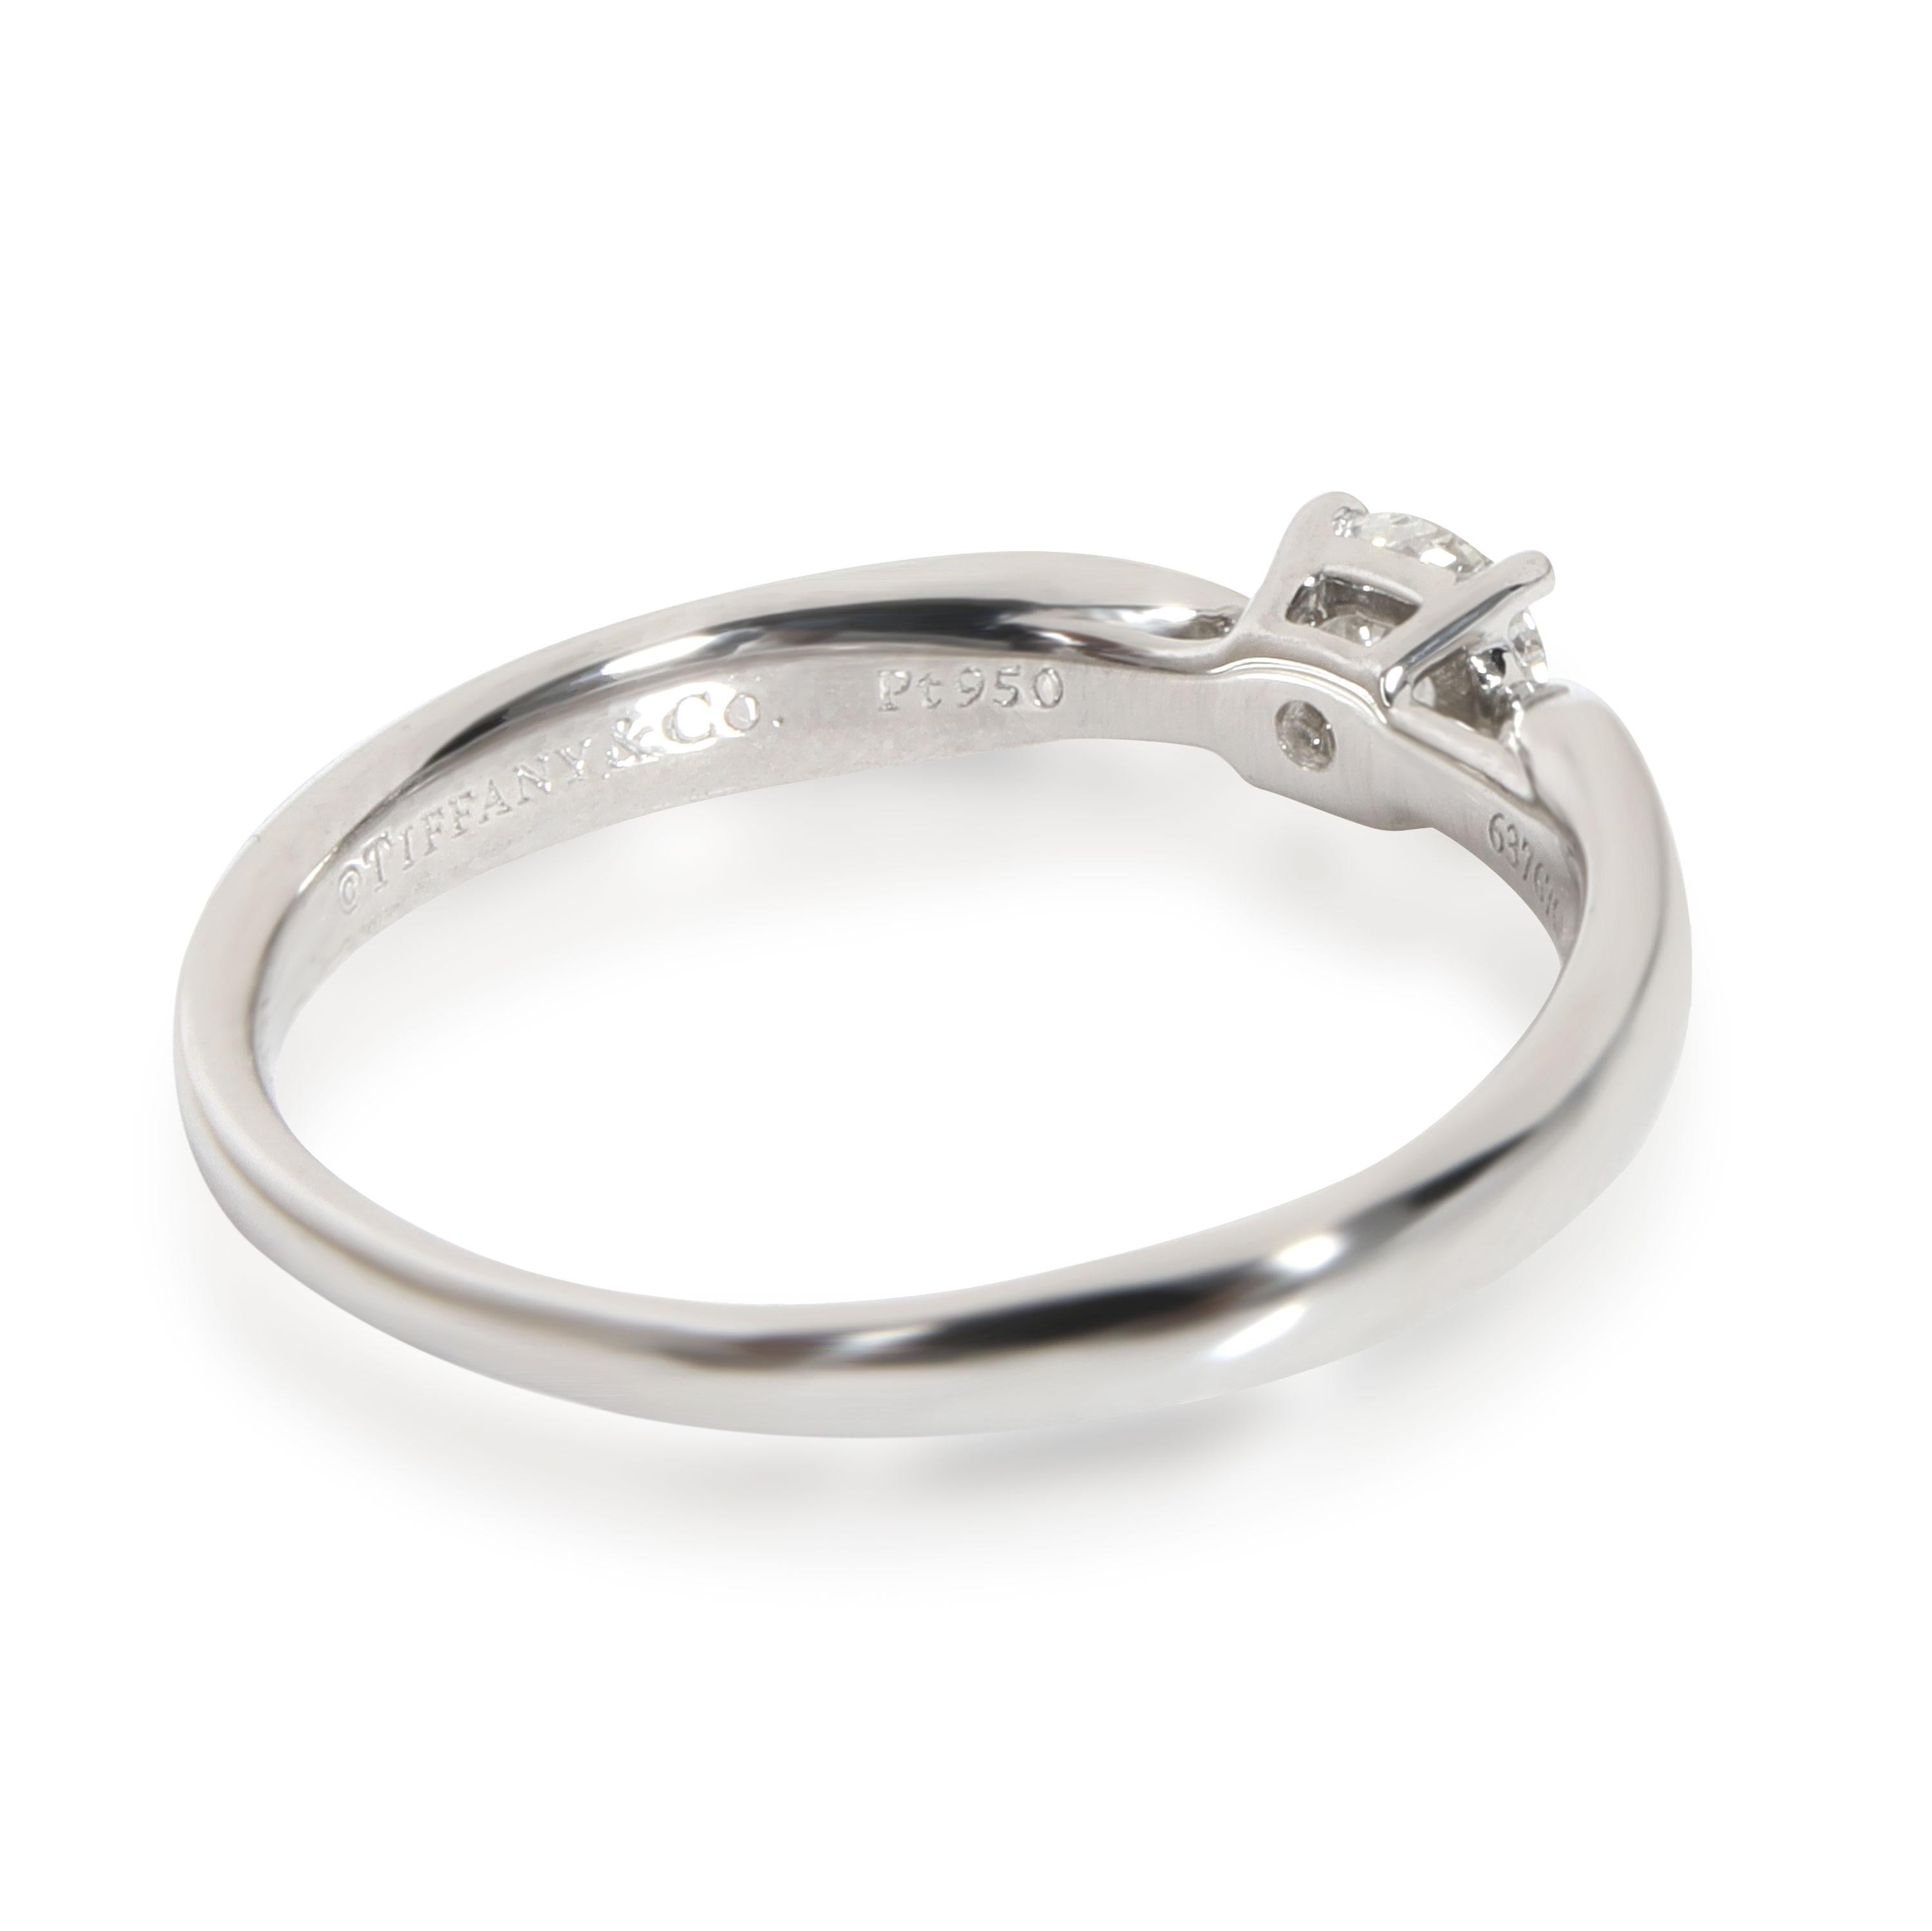 Tiffany & Co. Harmony Diamond Solitaire Ring in Platinum H VS1 0.21 CTW

PRIMARY DETAILS
SKU: 110797
Listing Title: Tiffany & Co. Harmony Diamond Solitaire Ring in Platinum H VS1 0.21 CTW
Condition Description: Retails for 2,900 USD. In excellent